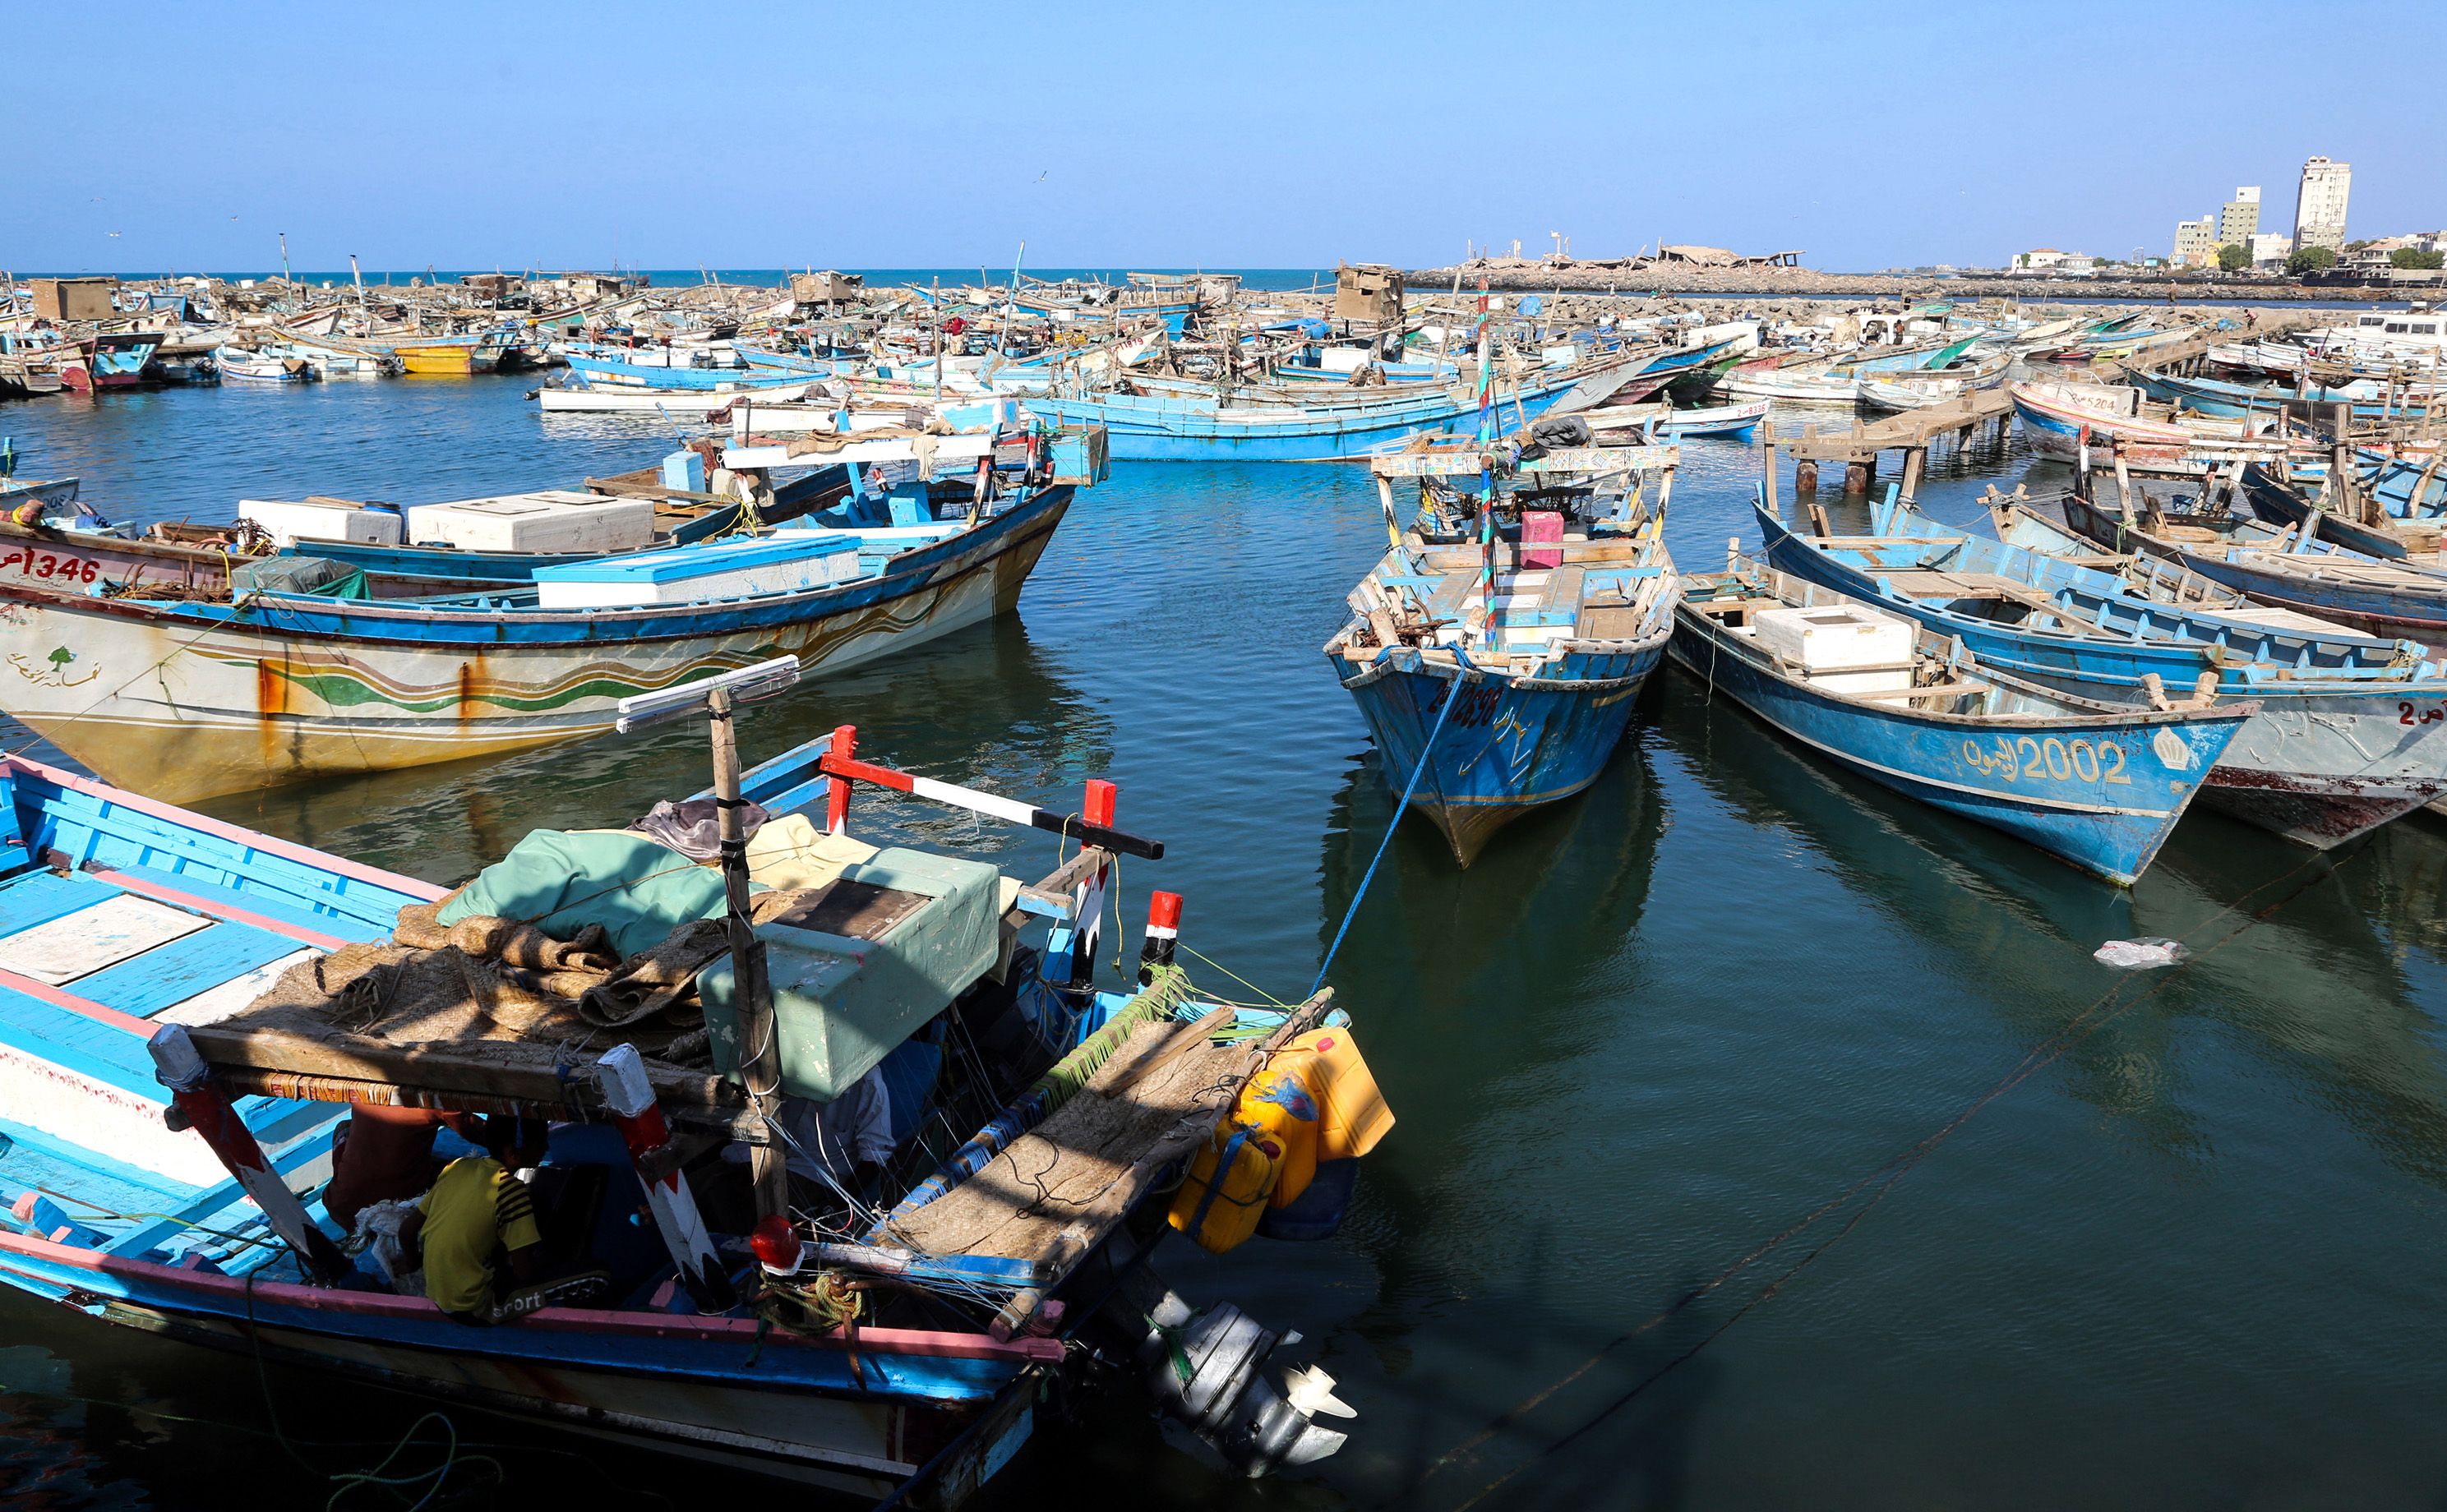 (FILES) This file picture taken on January 1, 2019 shows fishing boats moored to a dock in the embattled Yemeni Red Sea port city of Hodeida. - The United Nations and Yemen's Huthi rebels said the Huthis were to withdraw unilaterally from the three aid ports of Hodeida, Saleef, and Ras Issa starting May 11, 2019, in the first practical implementation of a ceasefire deal struck in Sweden in December. A senior pro-government official accused the rebels of faking the announced pullout without any monitoring by the UN and the government side. (Photo by - / AFP)